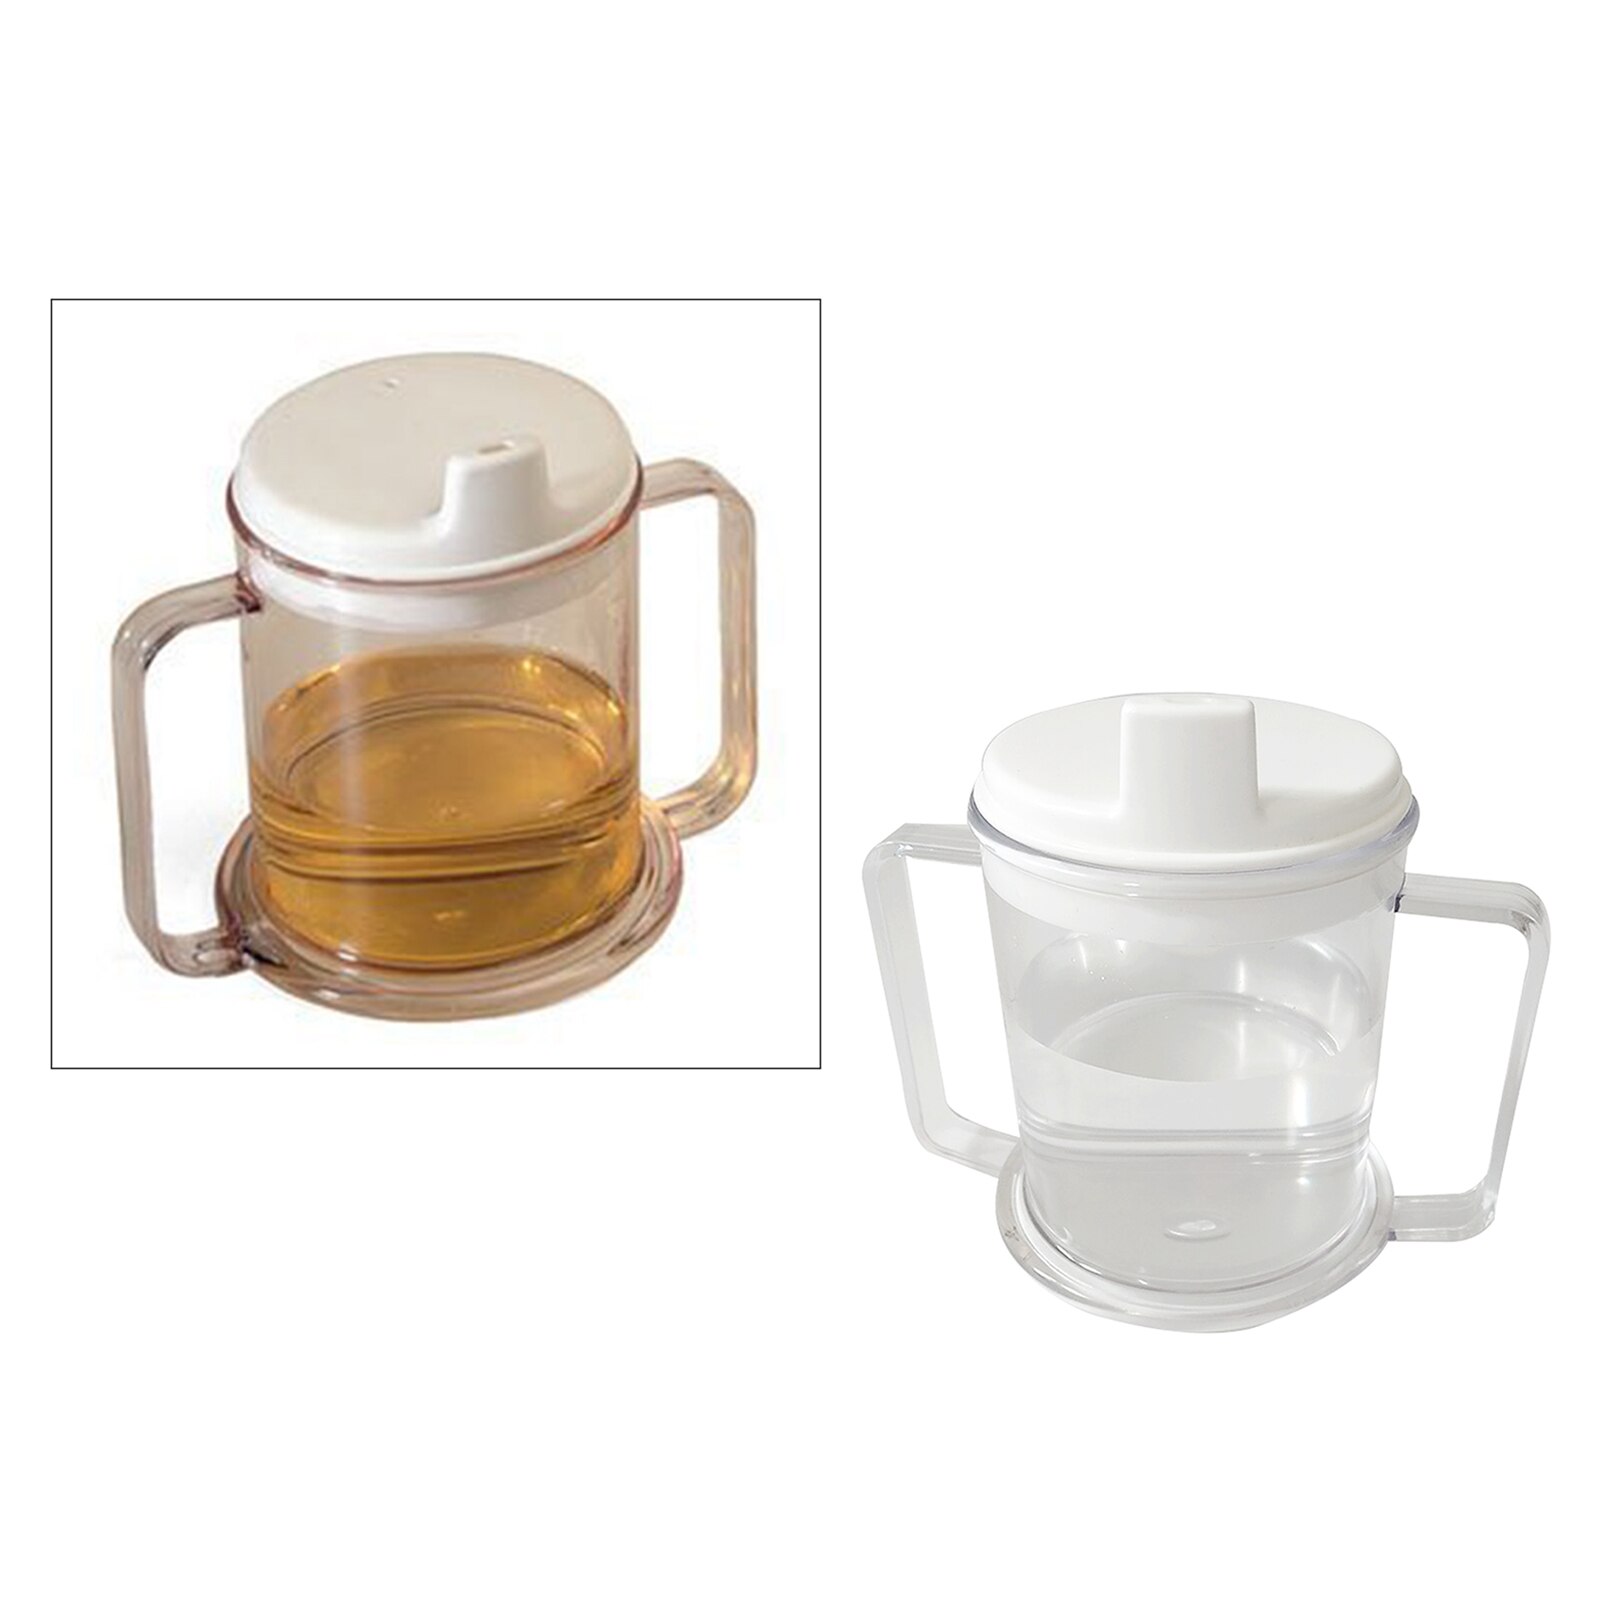 Clear Plastic Mug 2 Handled Sippy Cup 10oz. Drinking Cup for Kids Adult Elderly